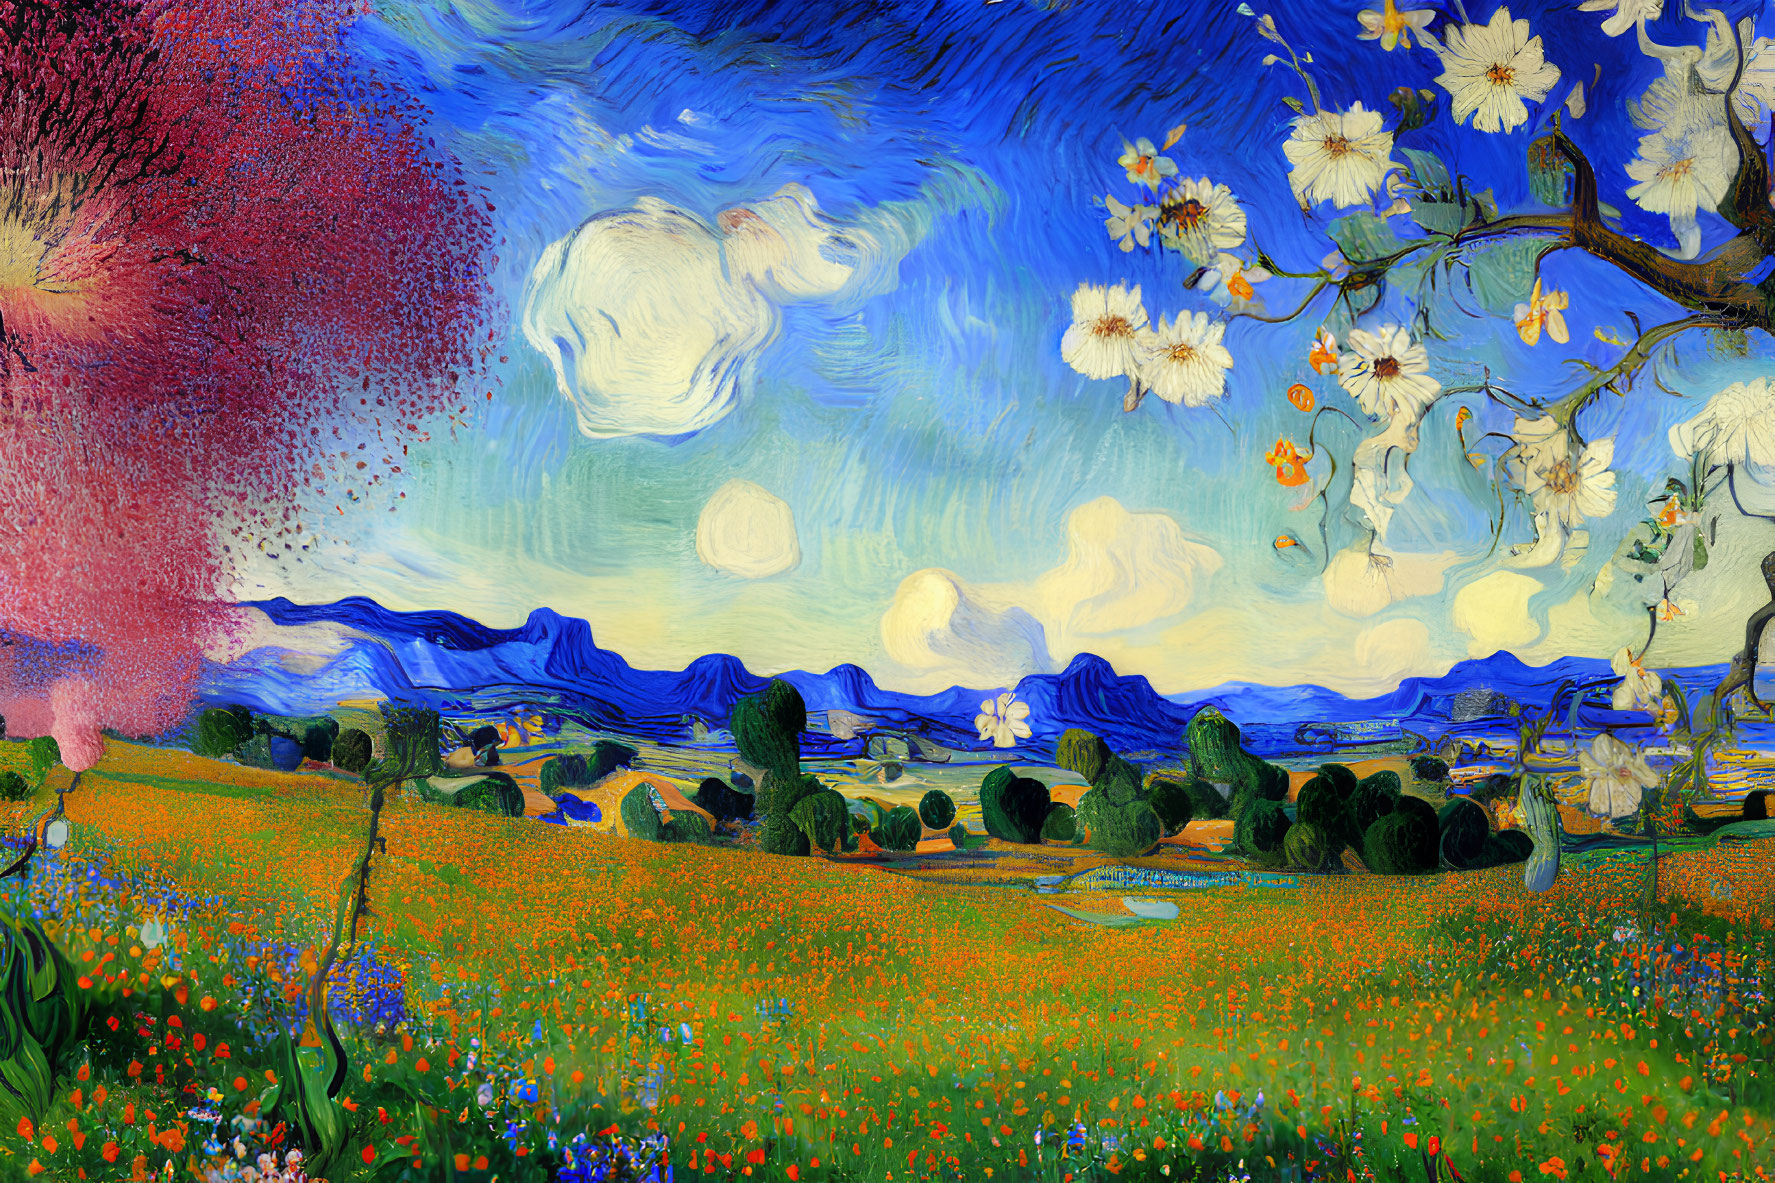 Colorful Van Gogh-inspired painting of swirling skies, blooming field, and distant hills